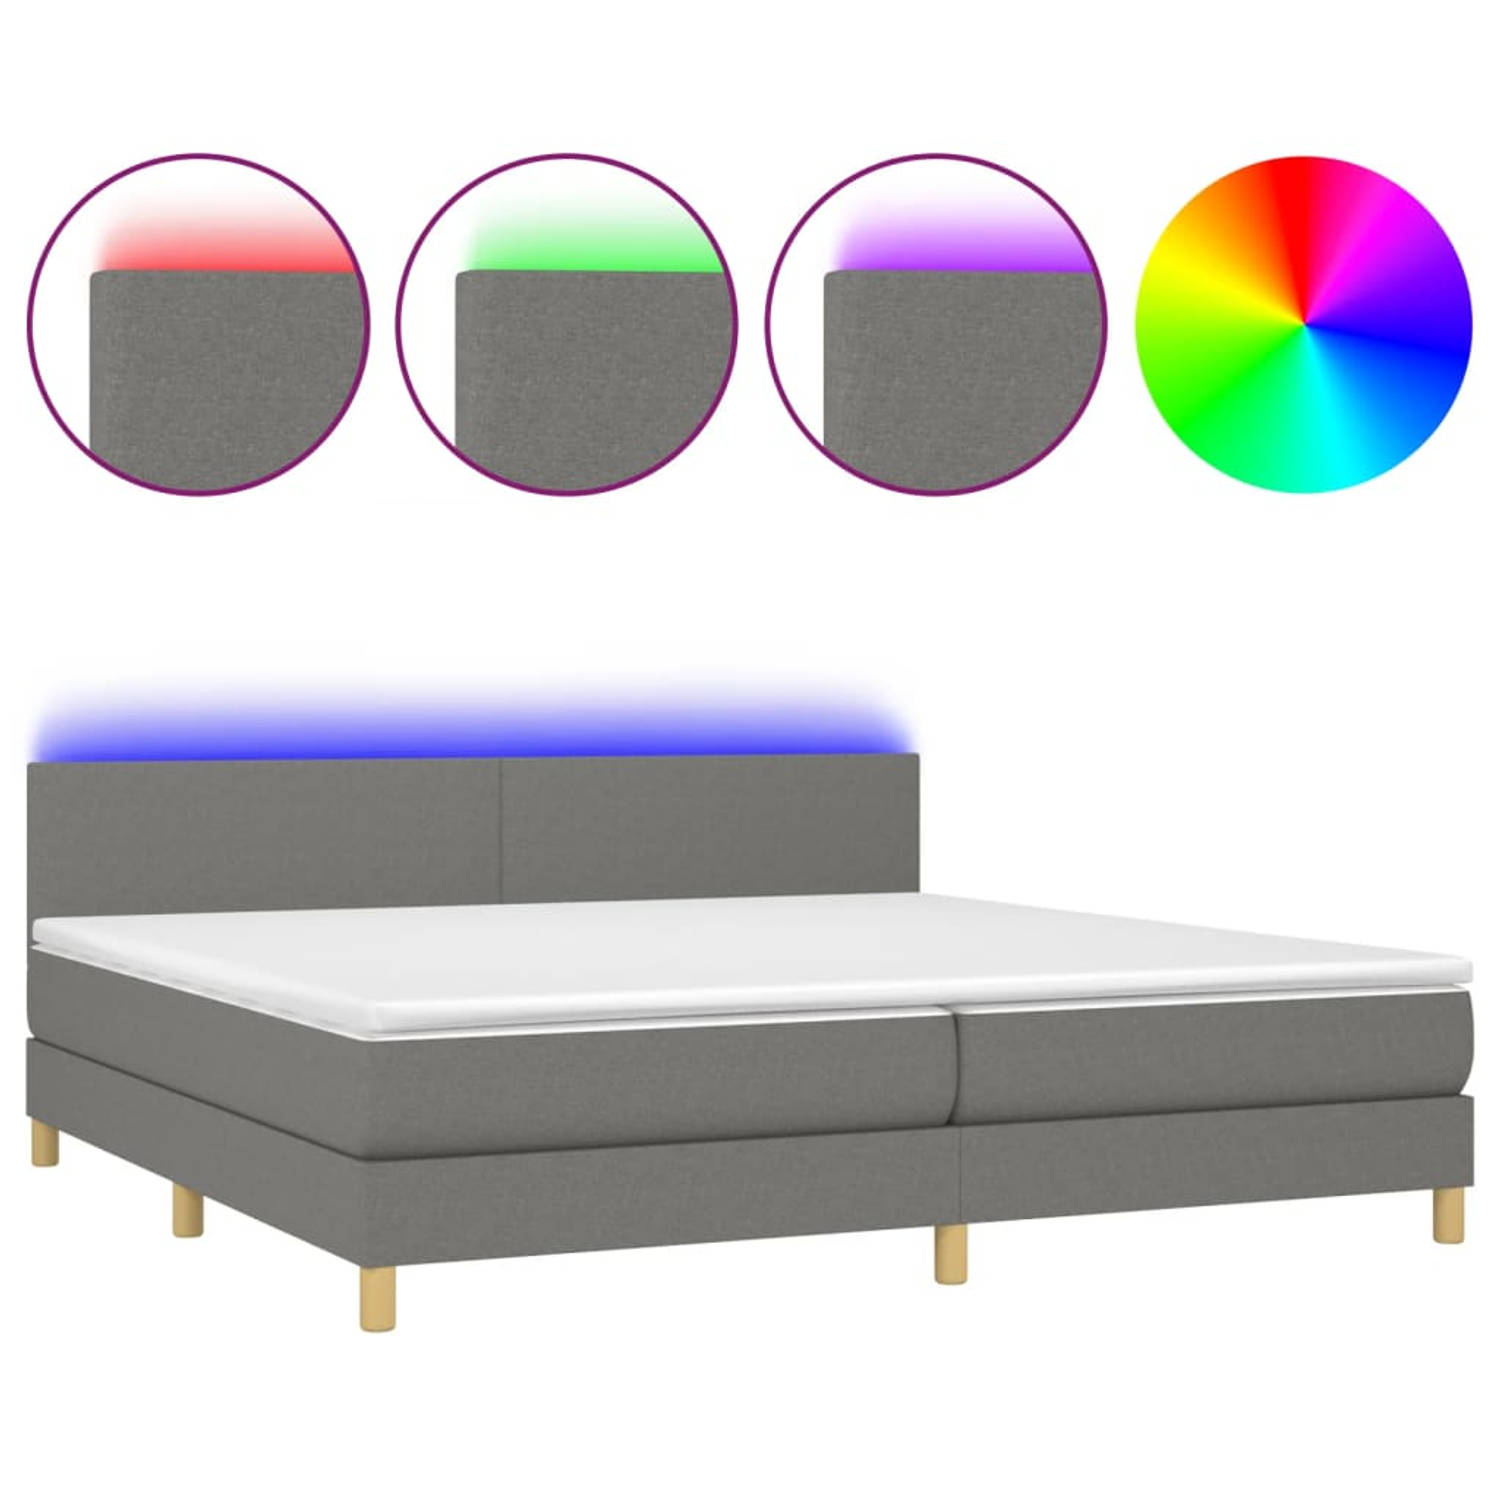 The Living Store Boxspring met matras en LED stof donkergrijs 200x200 cm - Boxspring - Boxsprings - Bed - Slaapmeubel - Boxspringbed - Boxspring Bed - Tweepersoonsbed - Bed Met Mat